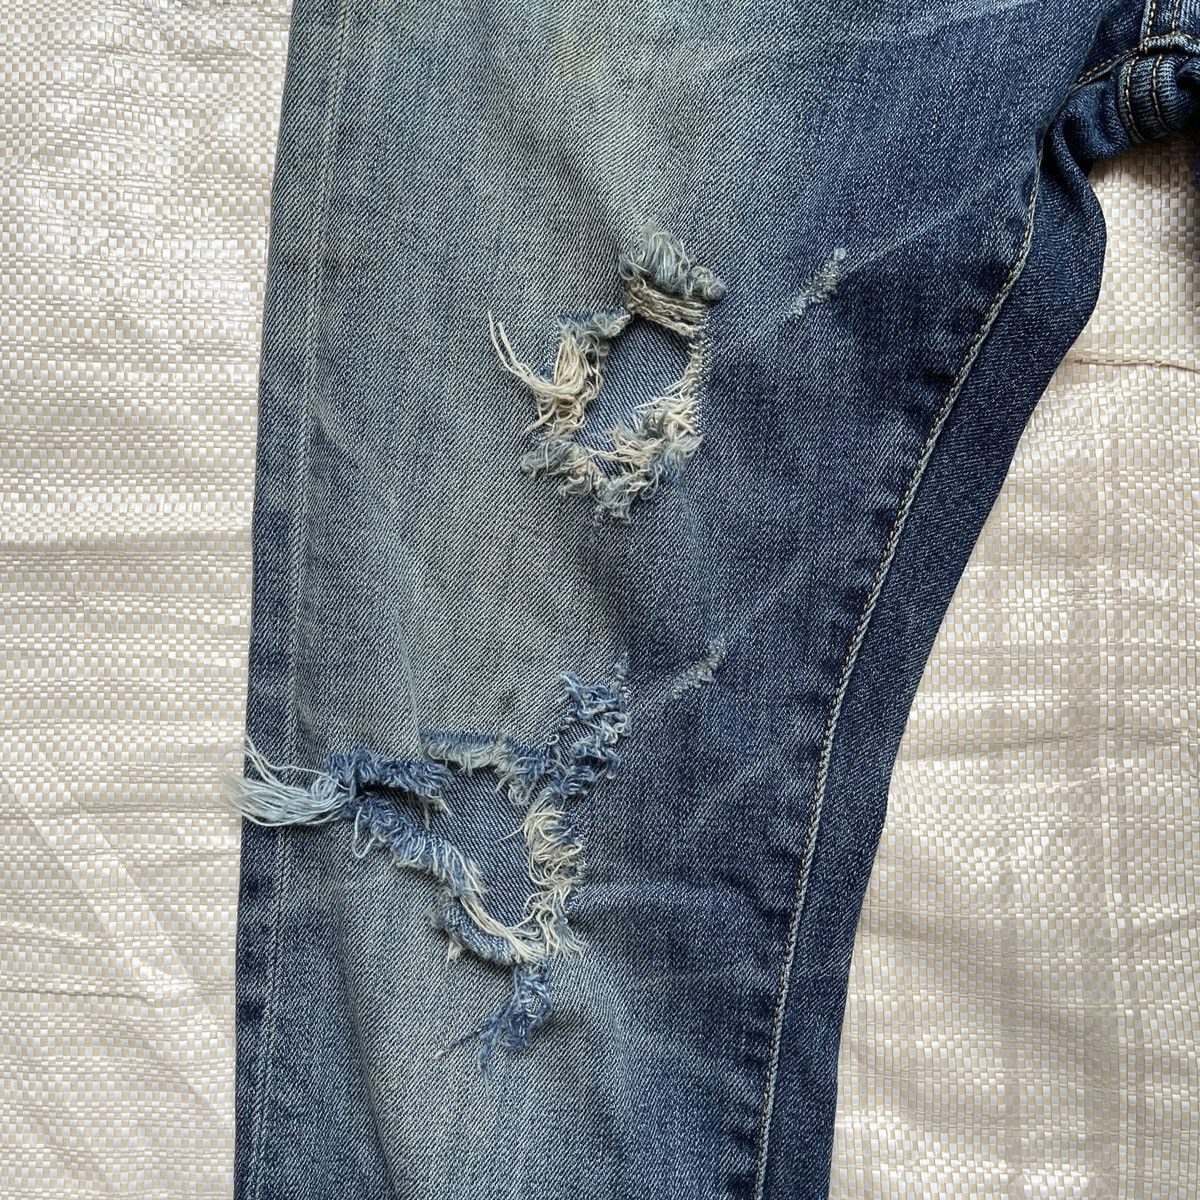 Distressed Denim - Ripped Black Label Denim Jeans With Patches At Pocket - 12